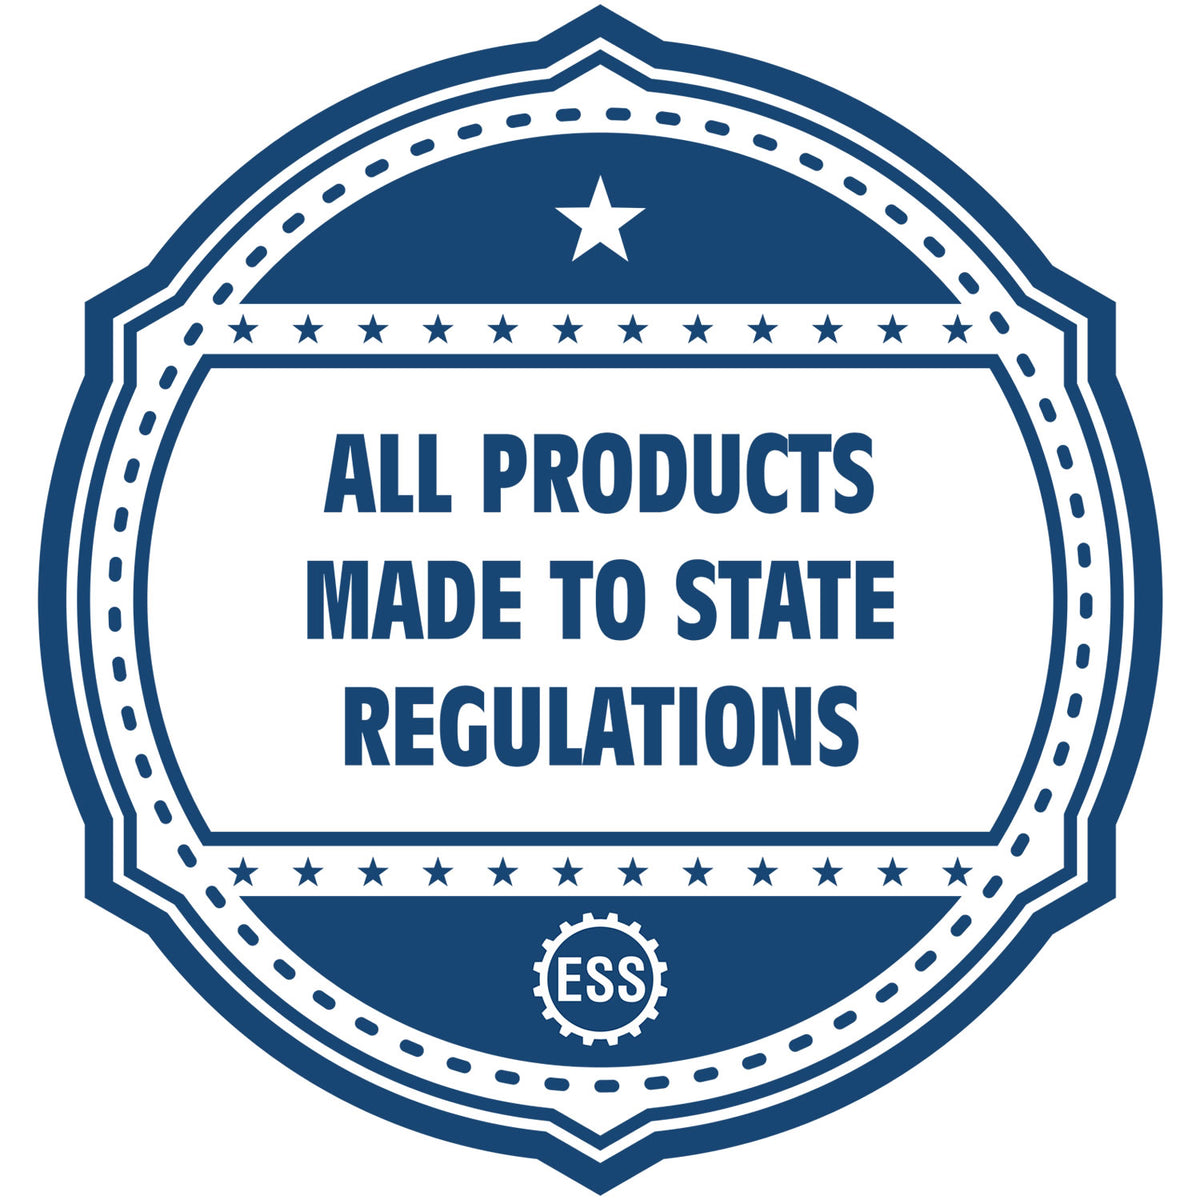 An icon or badge element for the Heavy-Duty New York Rectangular Notary Stamp showing that this product is made in compliance with state regulations.